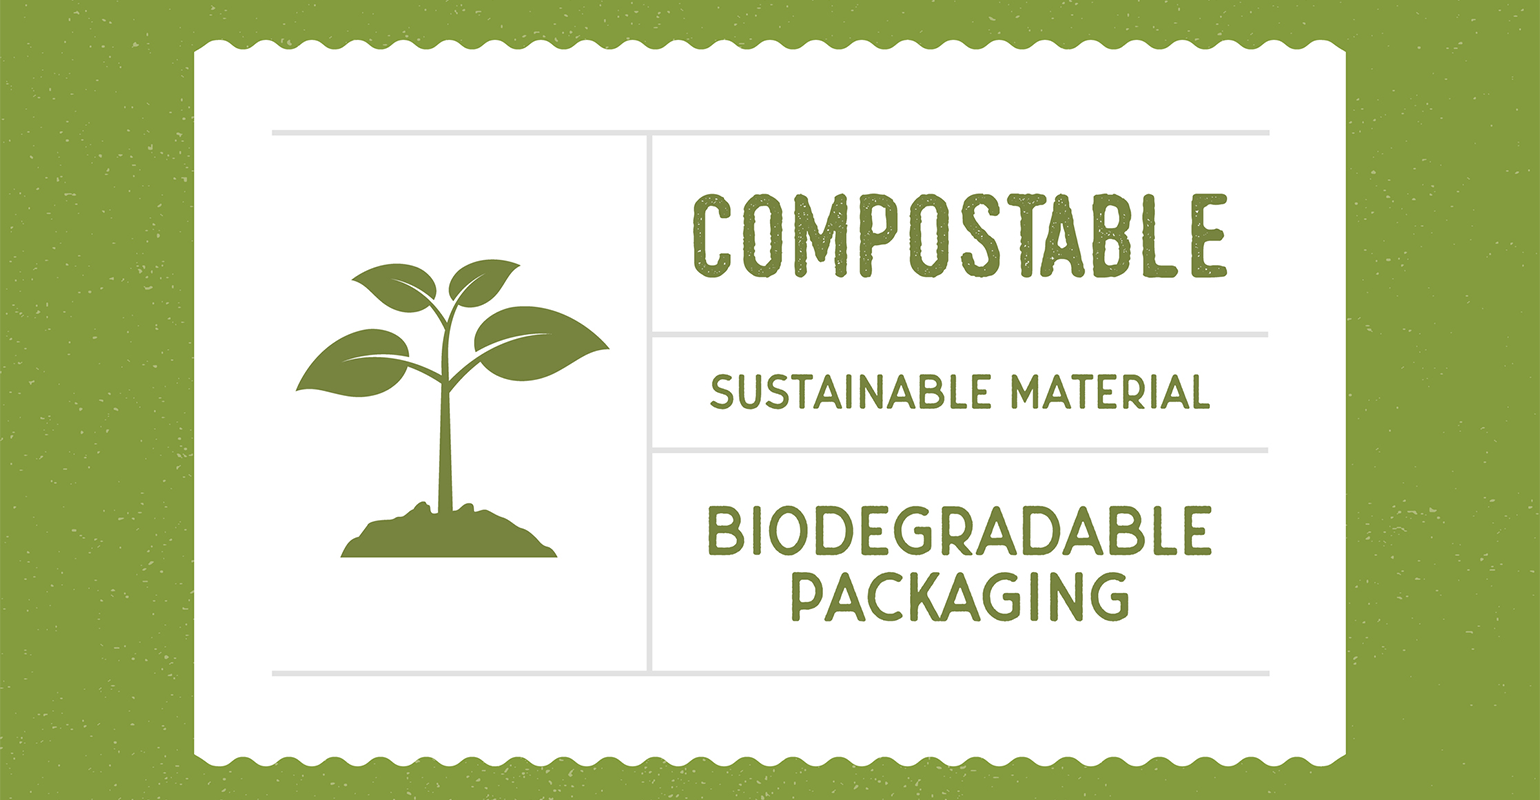 Biodegradable and Compostable Products